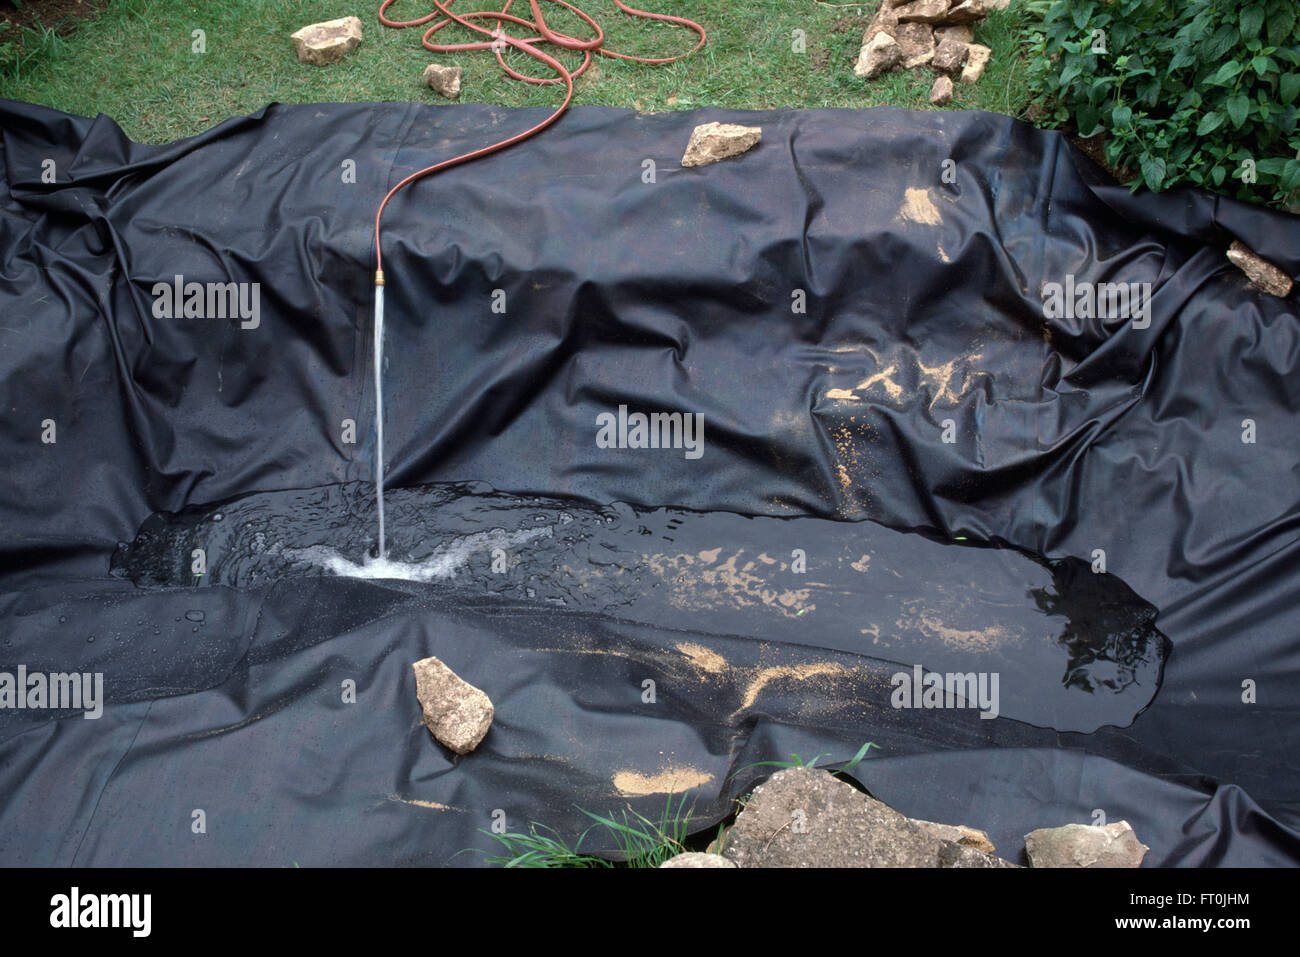 Close-up of a hose pipe pouring water into a newly made pond lined with a black plastic liner Stock Photo